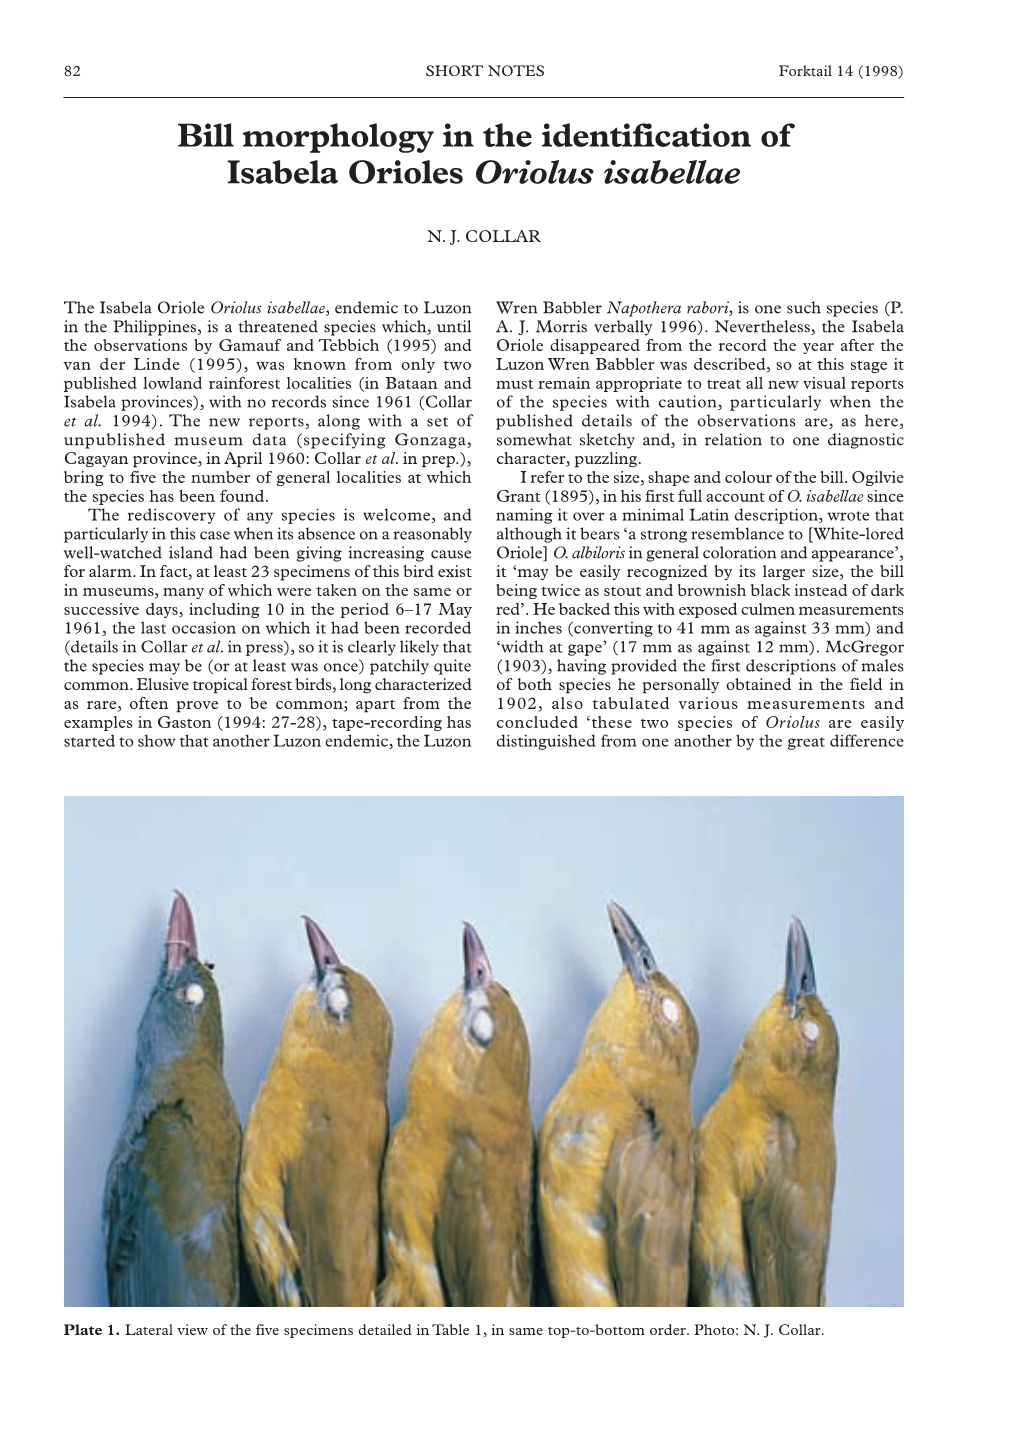 Bill Morphology in the Identification of Isabela Orioles Oriolus Isabellae